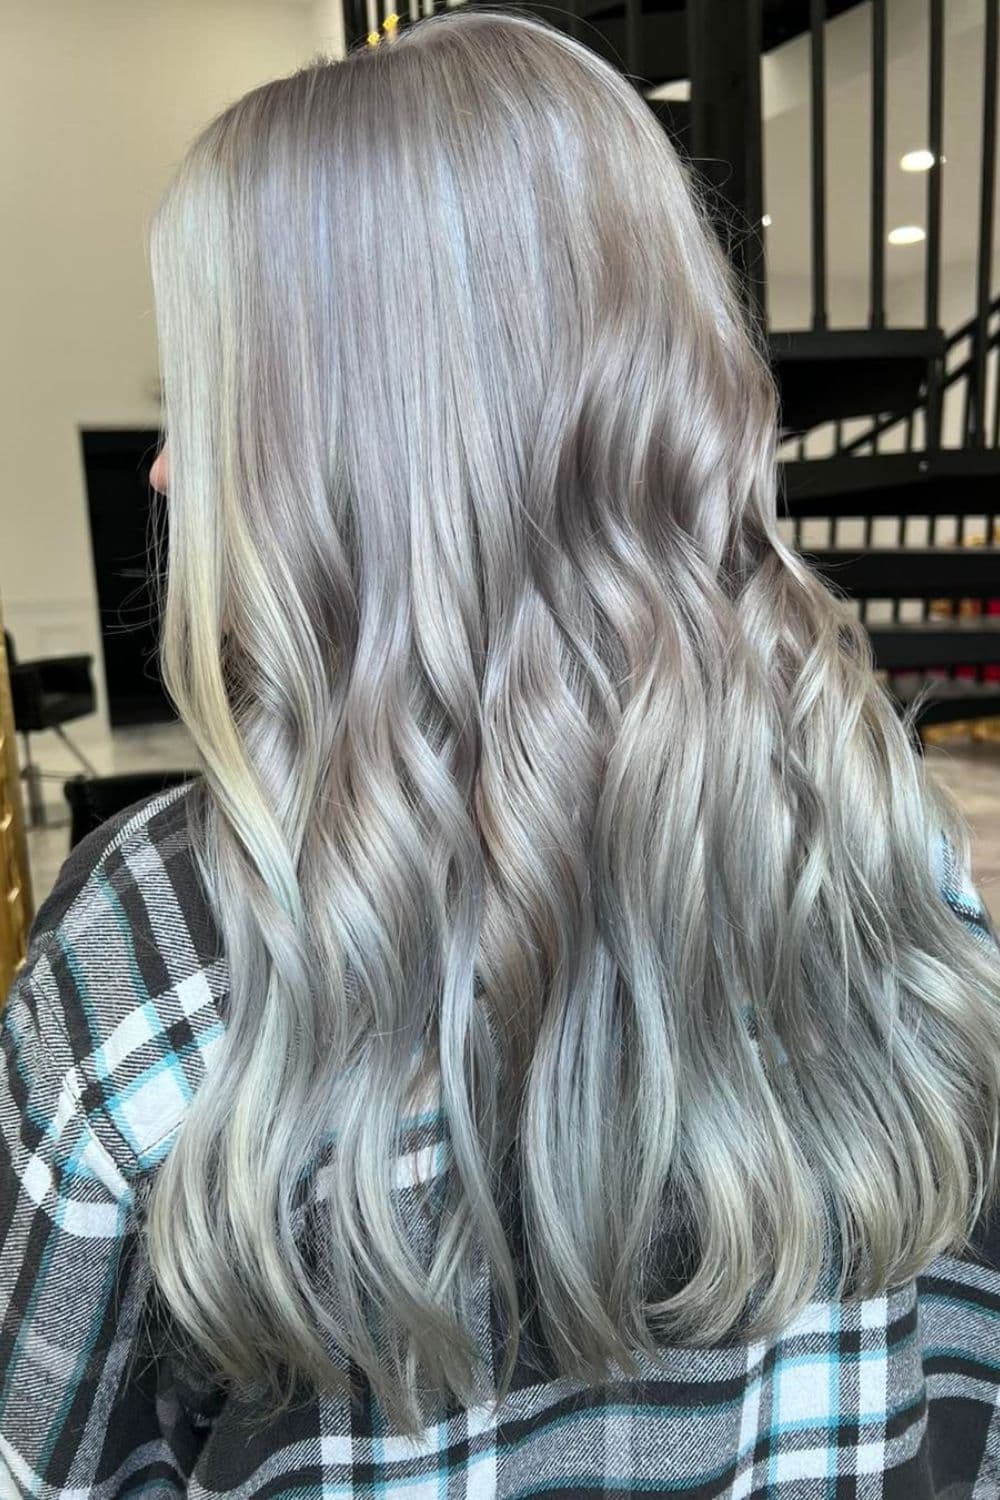 A woman with long wavy silver hair with white money pieces.